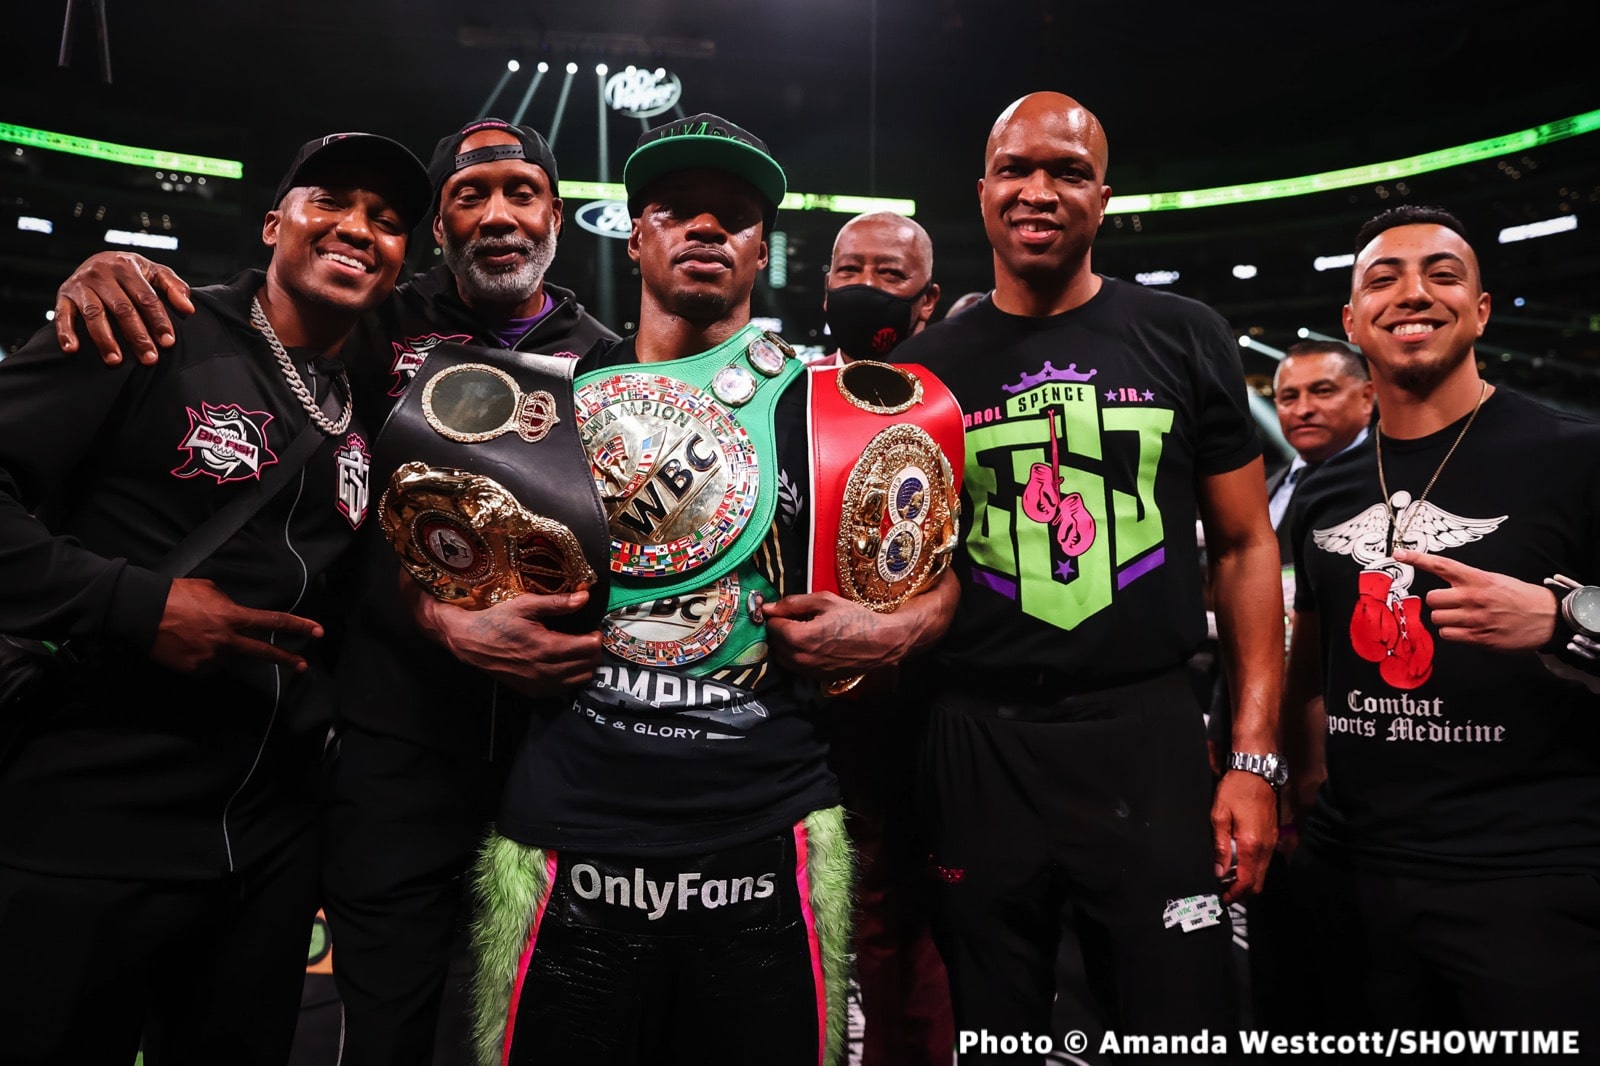 Image: Spence vs. Crawford needs a "World tour" says Shawn Porter